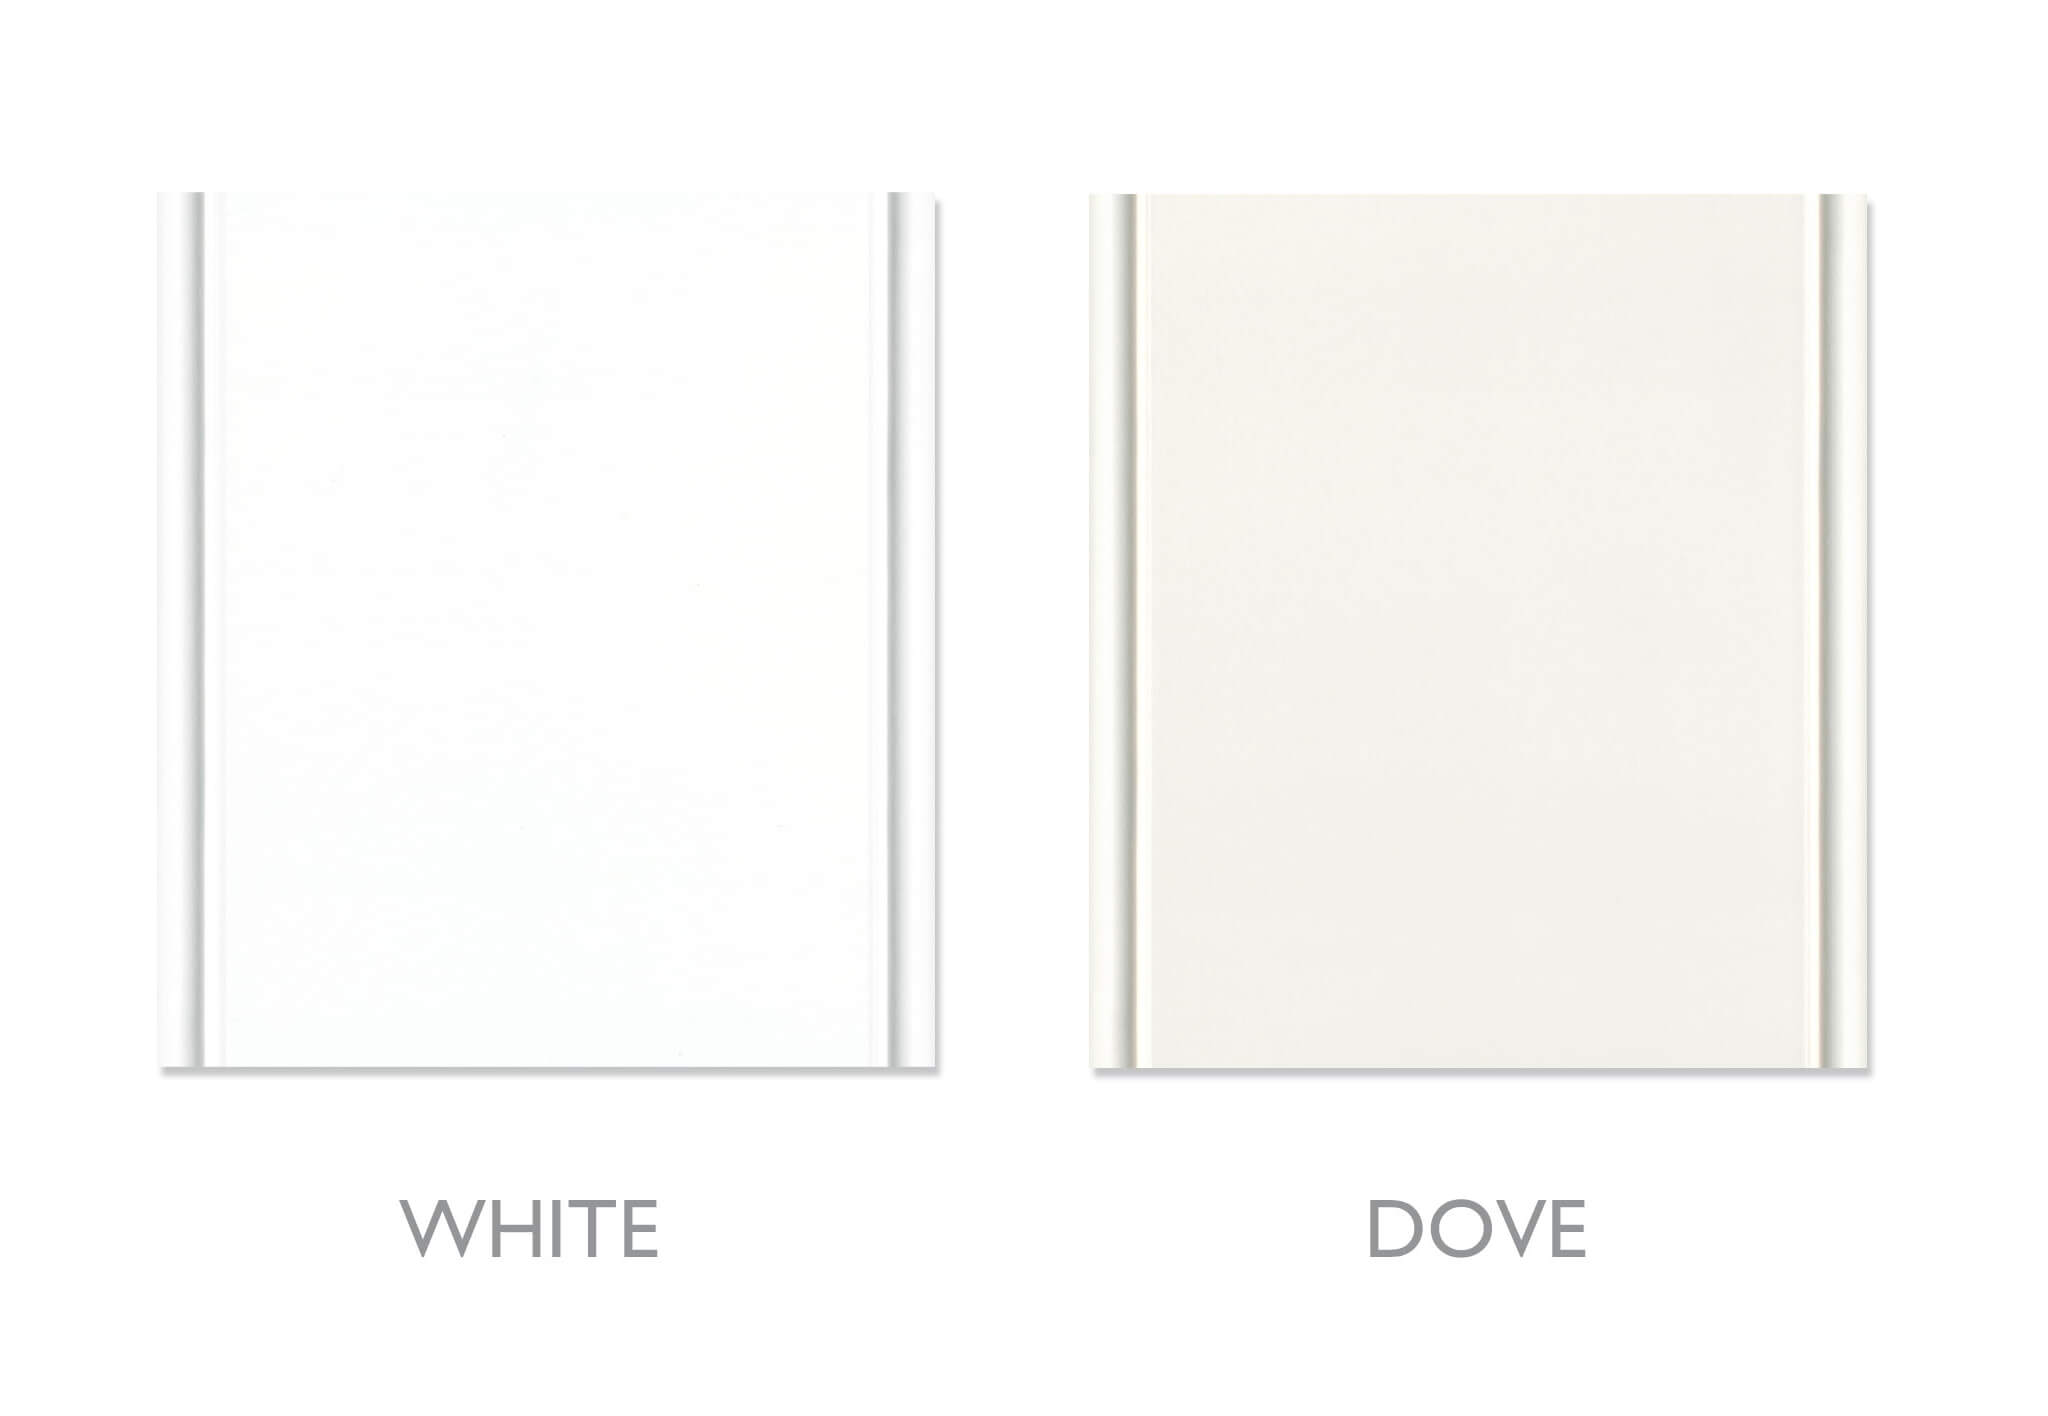 A sample of two of Dura Supreme Cabinetry's most popular white painted finishes, White and Dove.